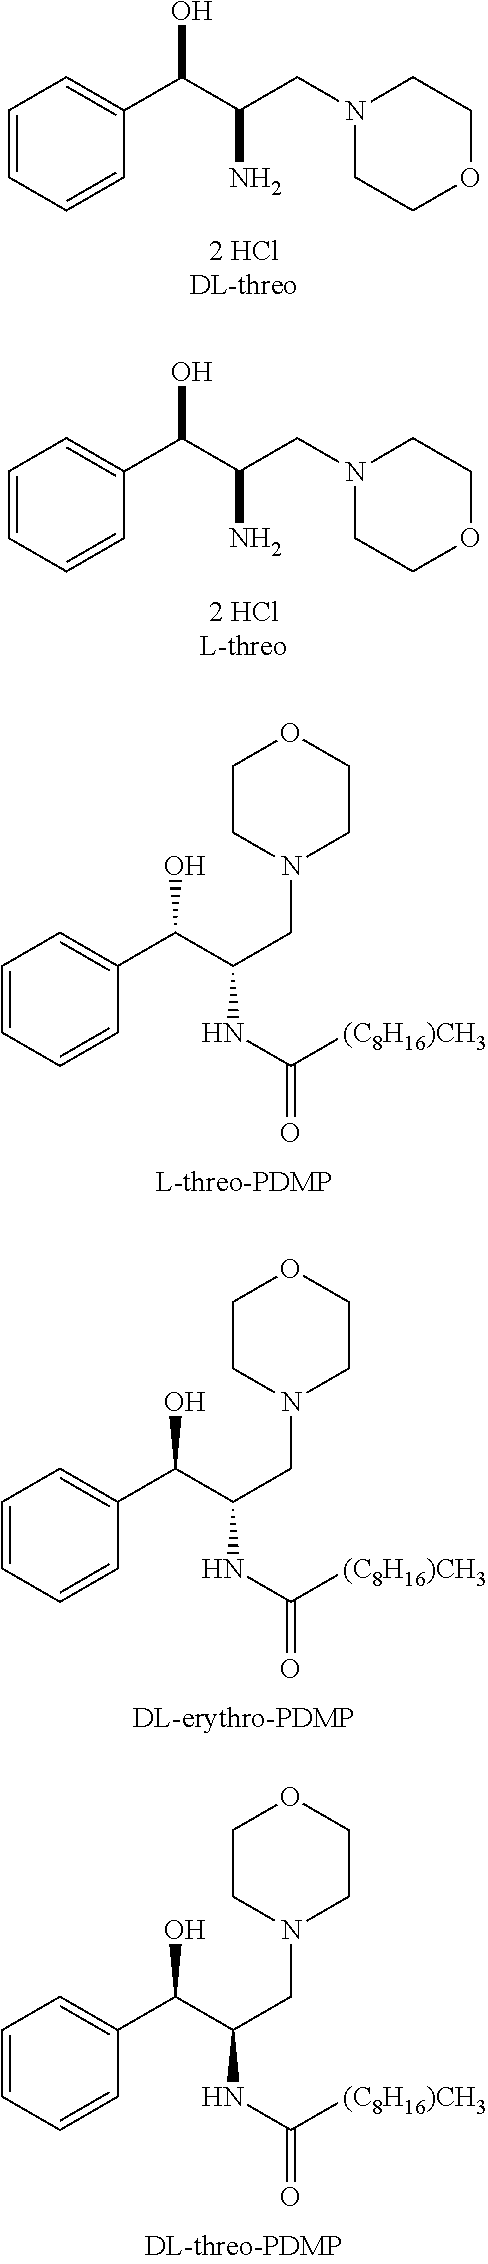 Methods of using as analgesics 1-benzyl-1-hydroxy-2, 3-diamino-propyl amines, 3-benzyl-3-hyrdroxy-2-amino-propionic acid amides and related compounds